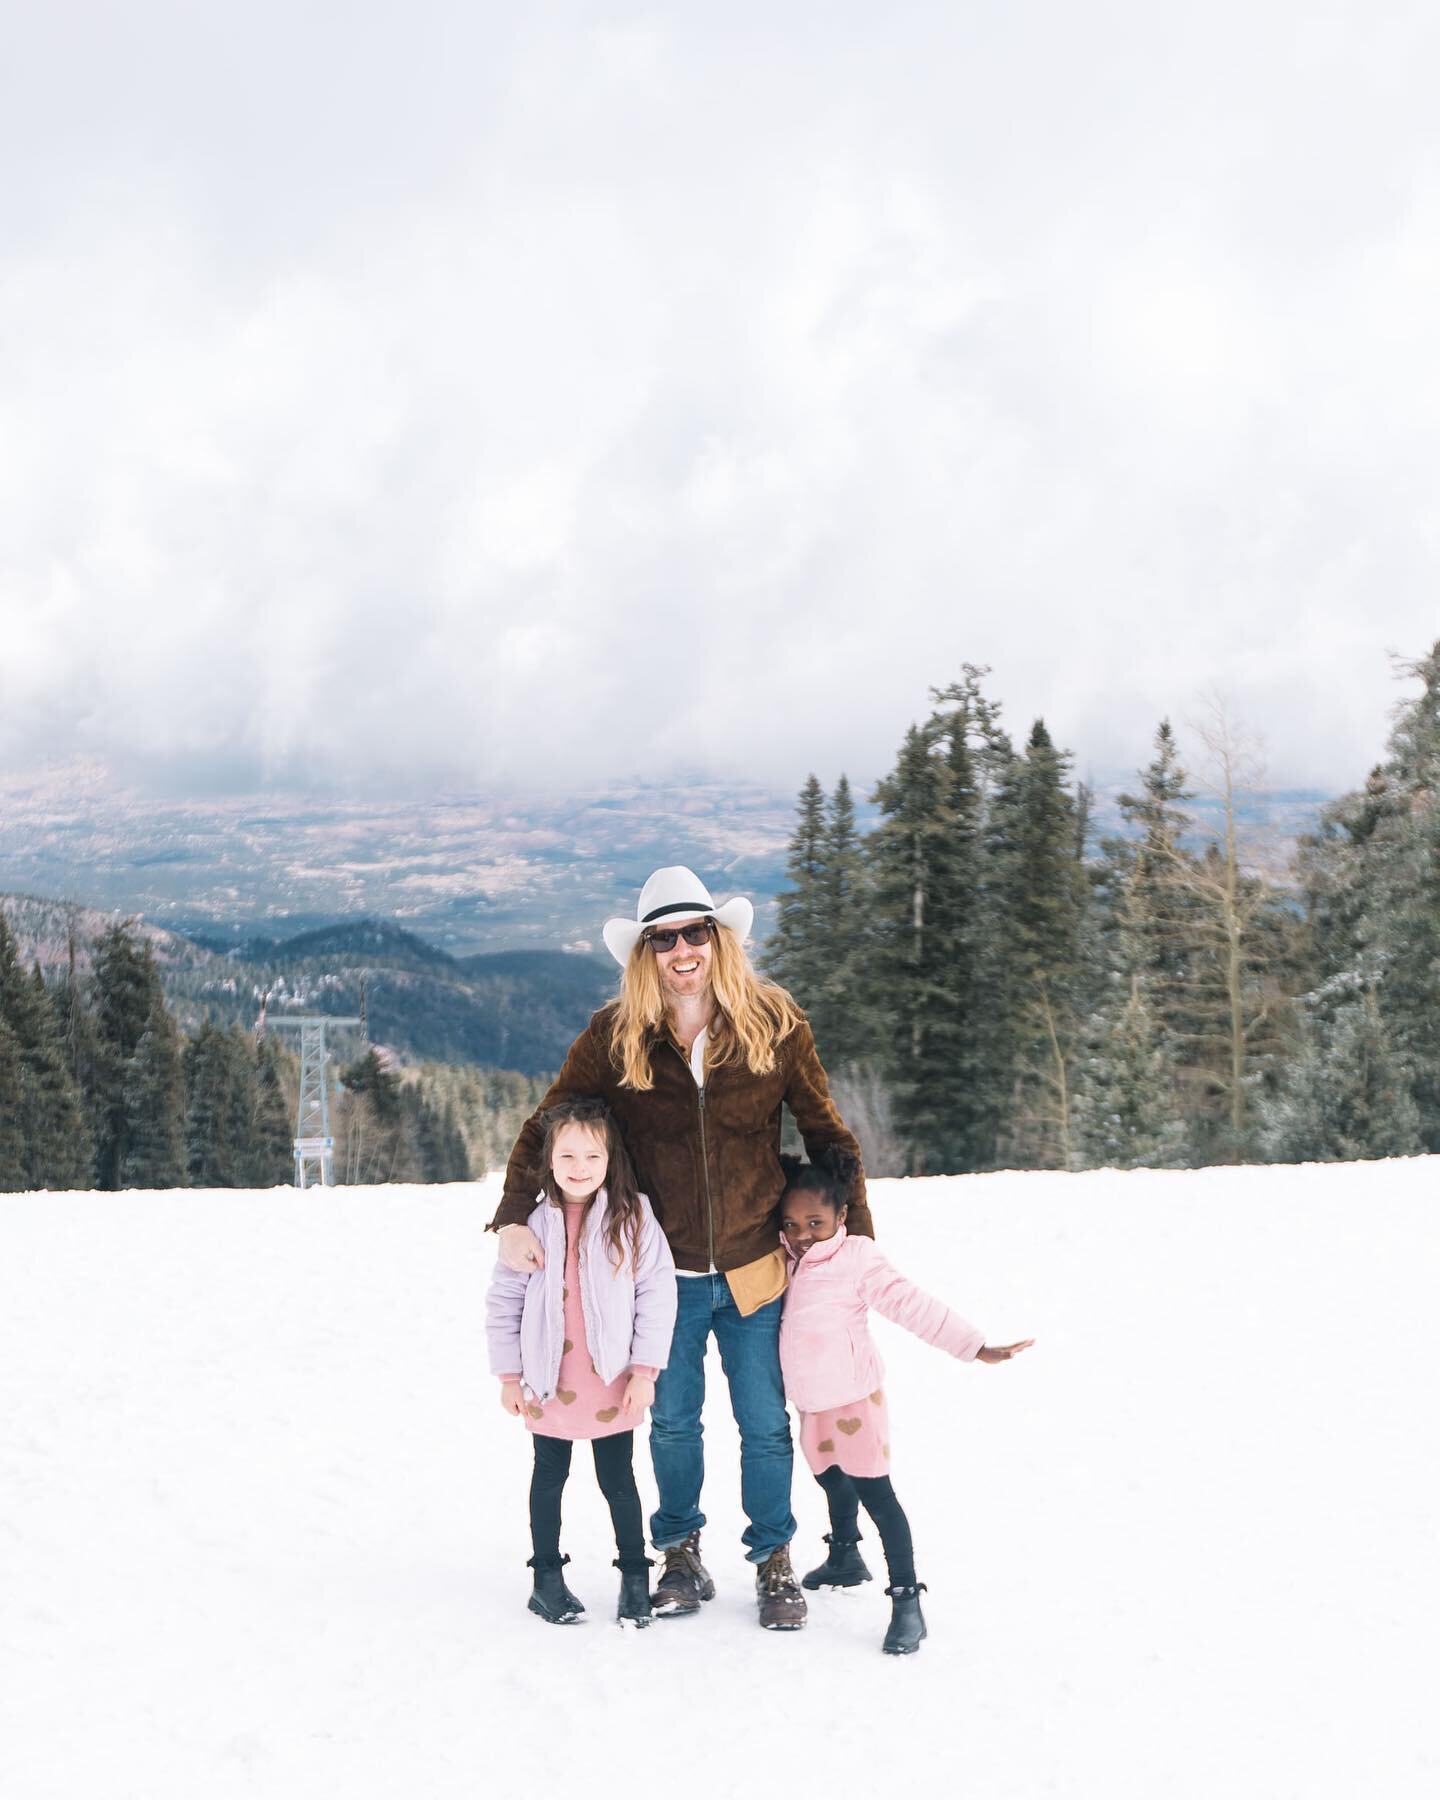 Throwback to Spring Break in our favorite place🏔️

From hiking Sun Mountain, taking the Albuquerque tram, and riding the Sky Railway train, our Spring Break was filled with the best family laughs and memories.